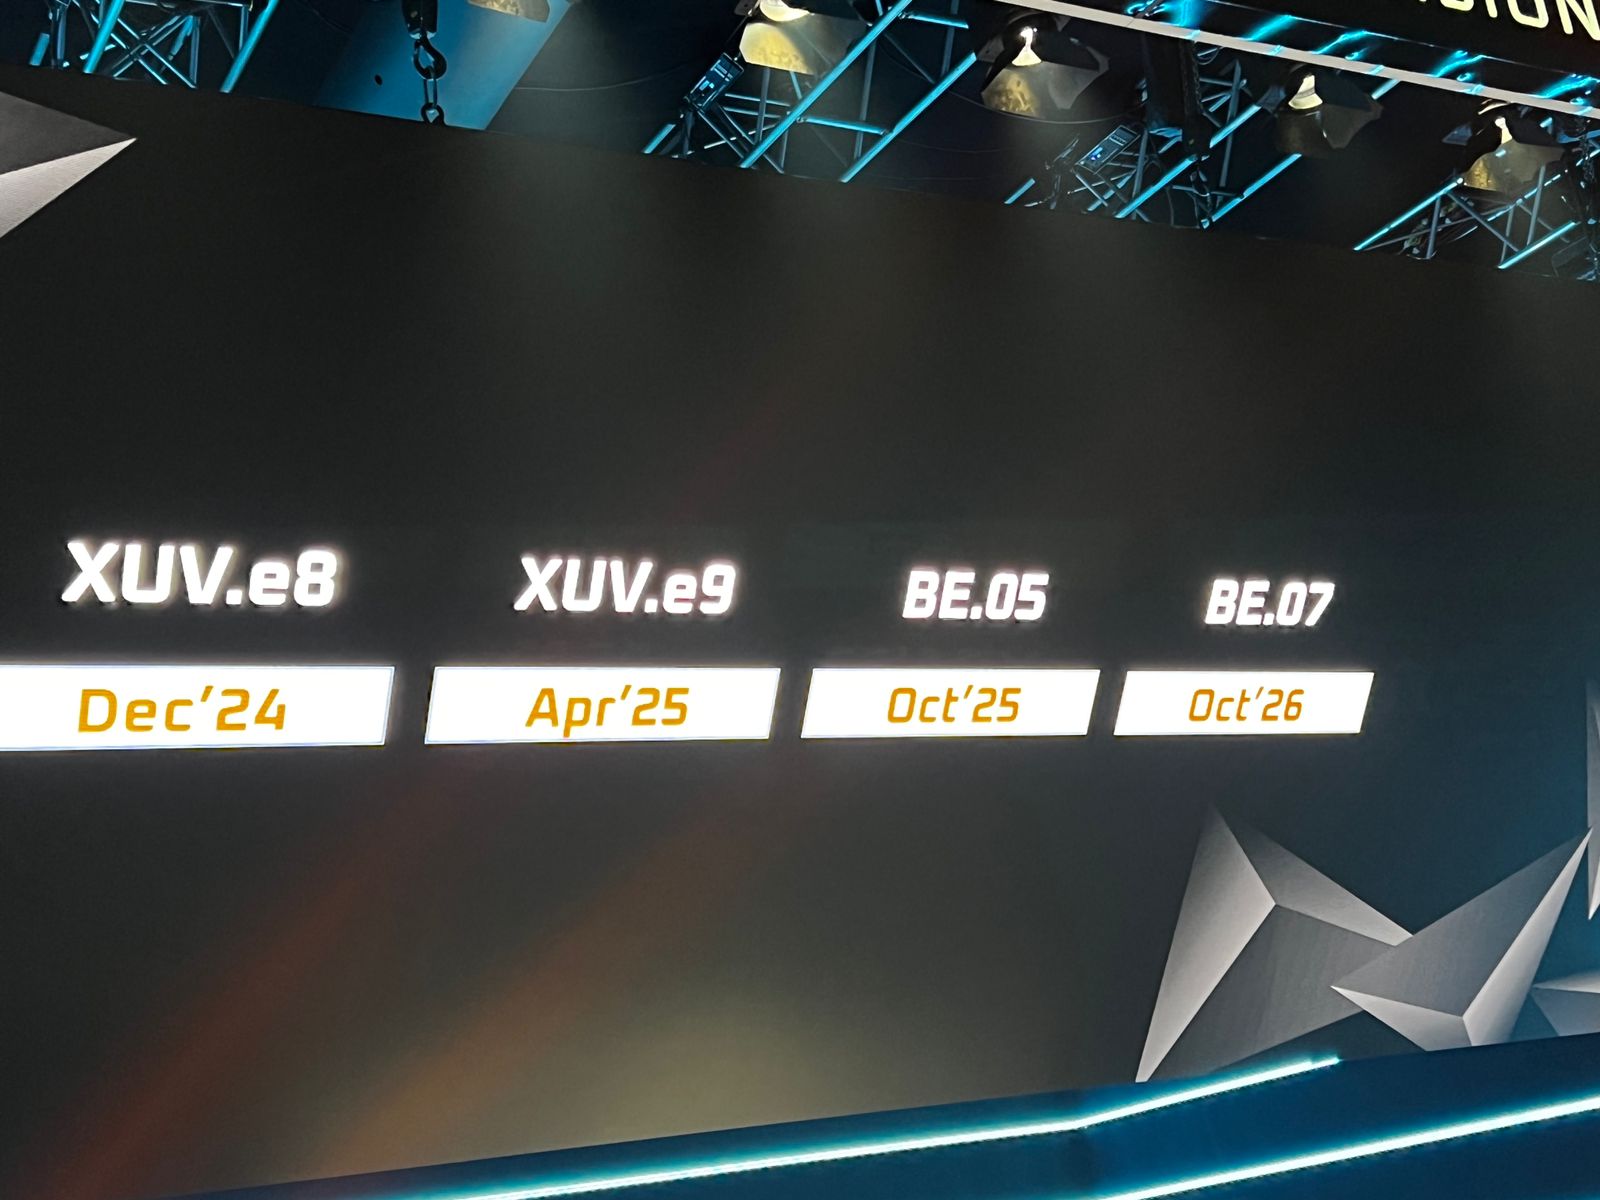 <p>Expected launch dates of the BE and XUV electric cars</p>